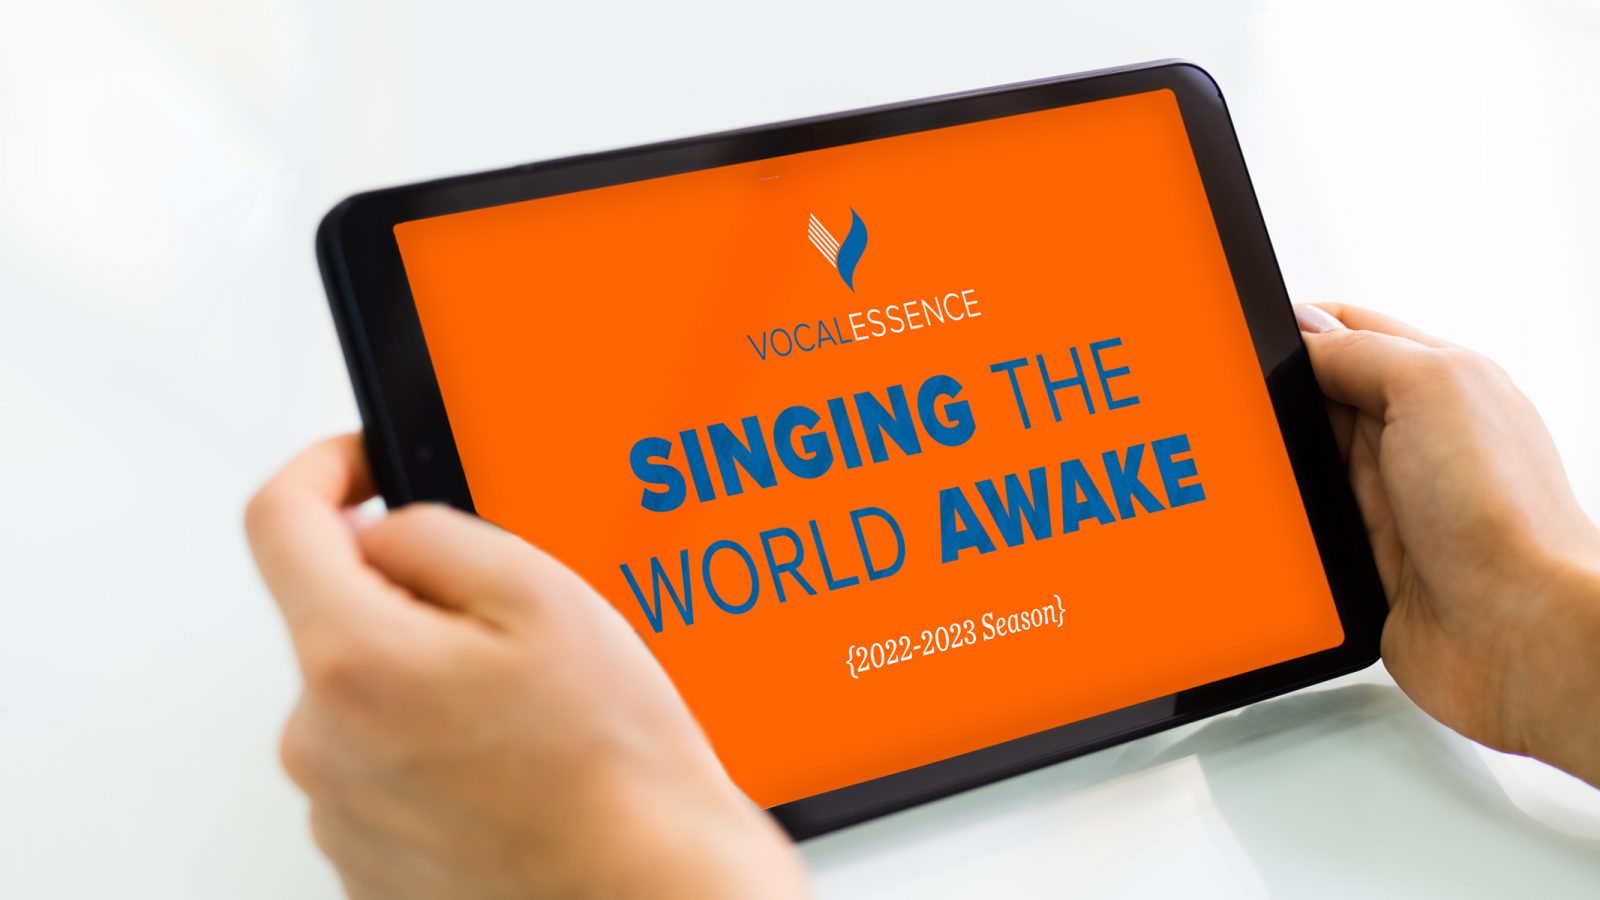 Hands holding tablet with VocalEssence logo, Singing the World Awake, and 2022-2023 Season on an orange background